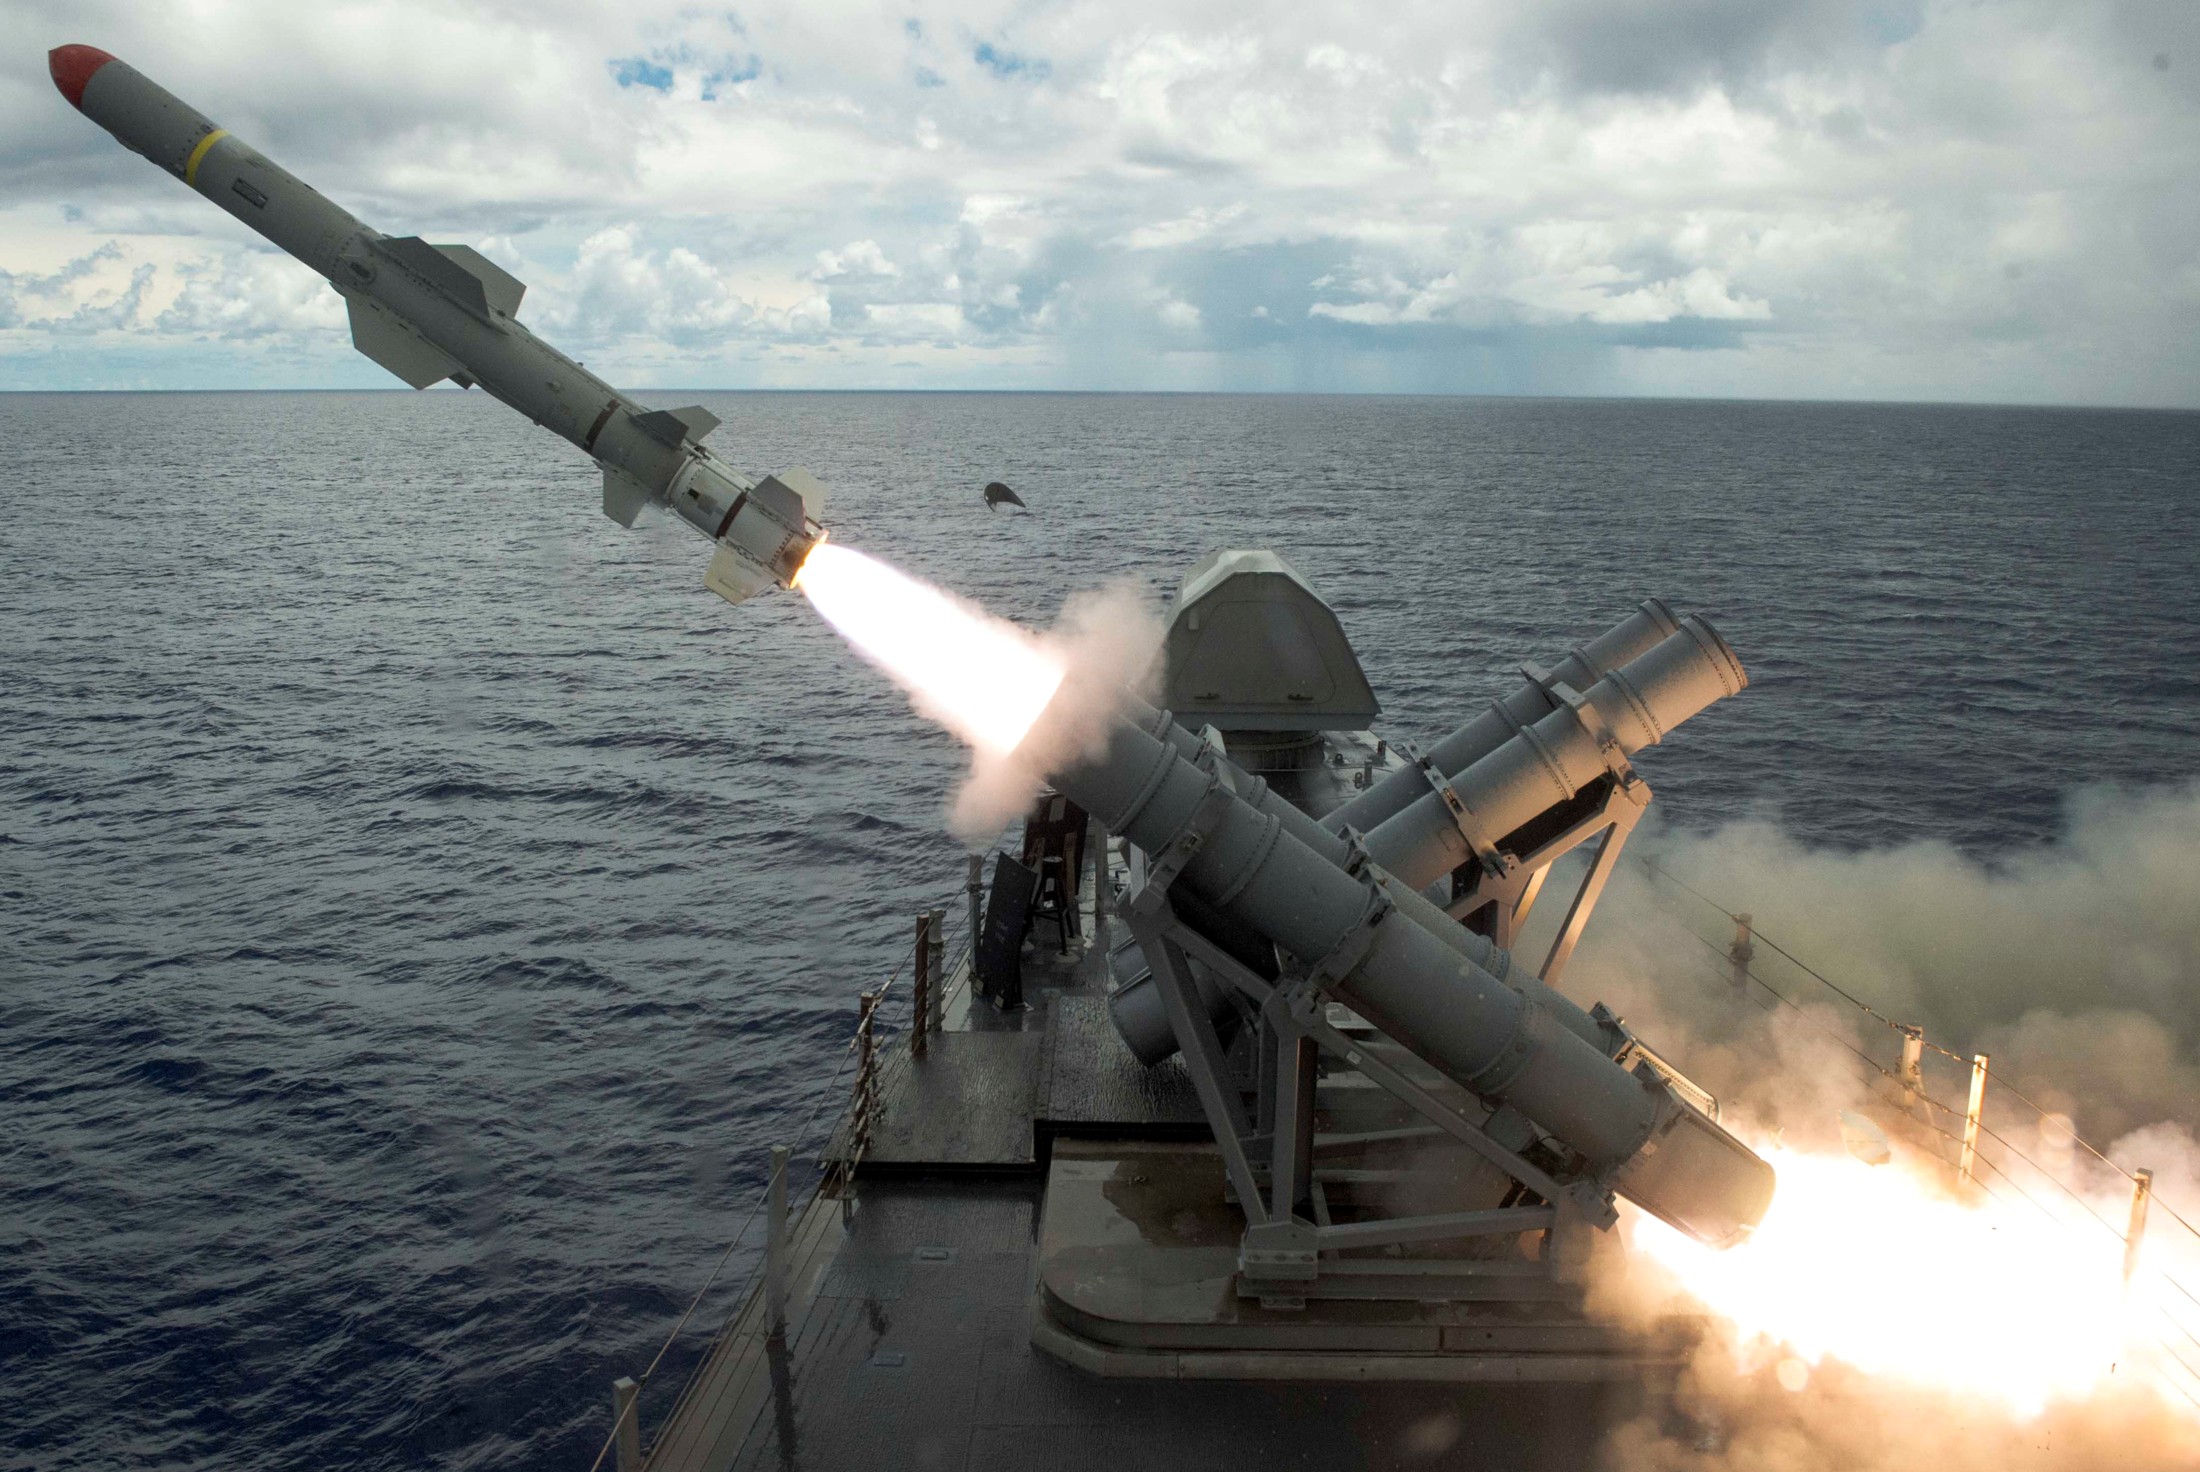 rgm-84 harpoon ssm mk-141 missile launcher independence class littoral combat ship lcs 51